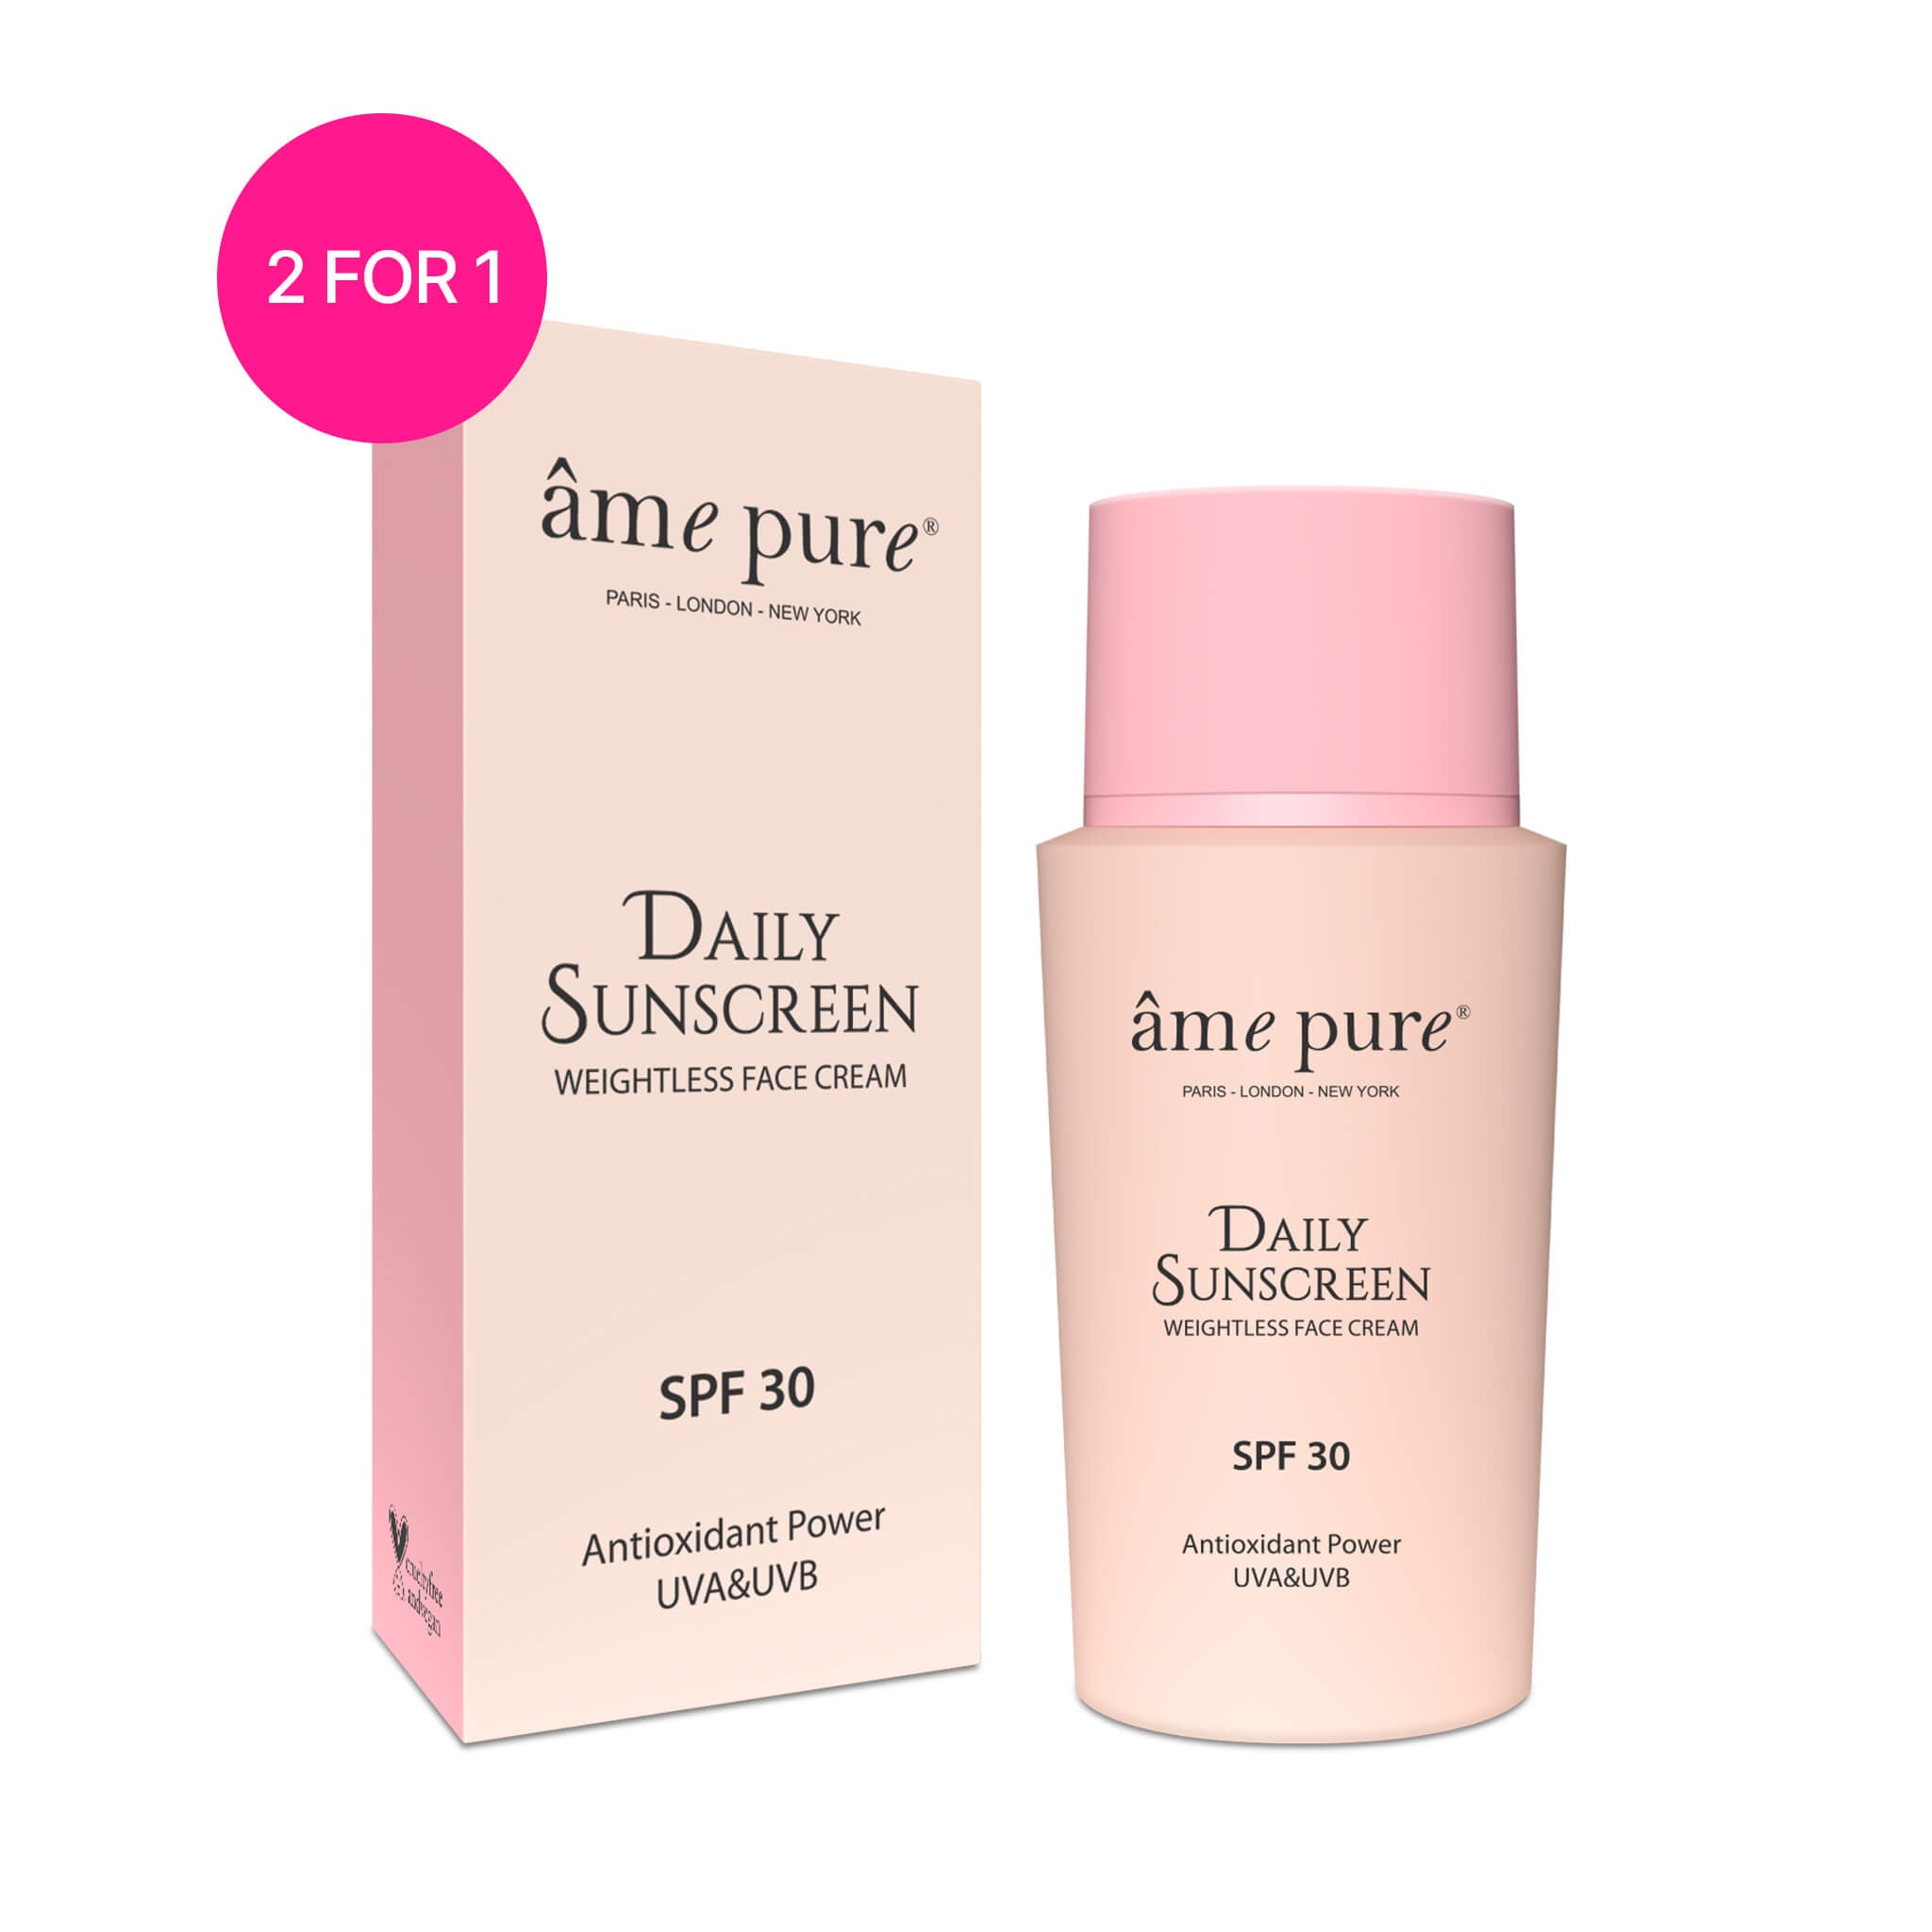 Daily Sunscreen | SPF 30 | Buy 1 Get 1 Free